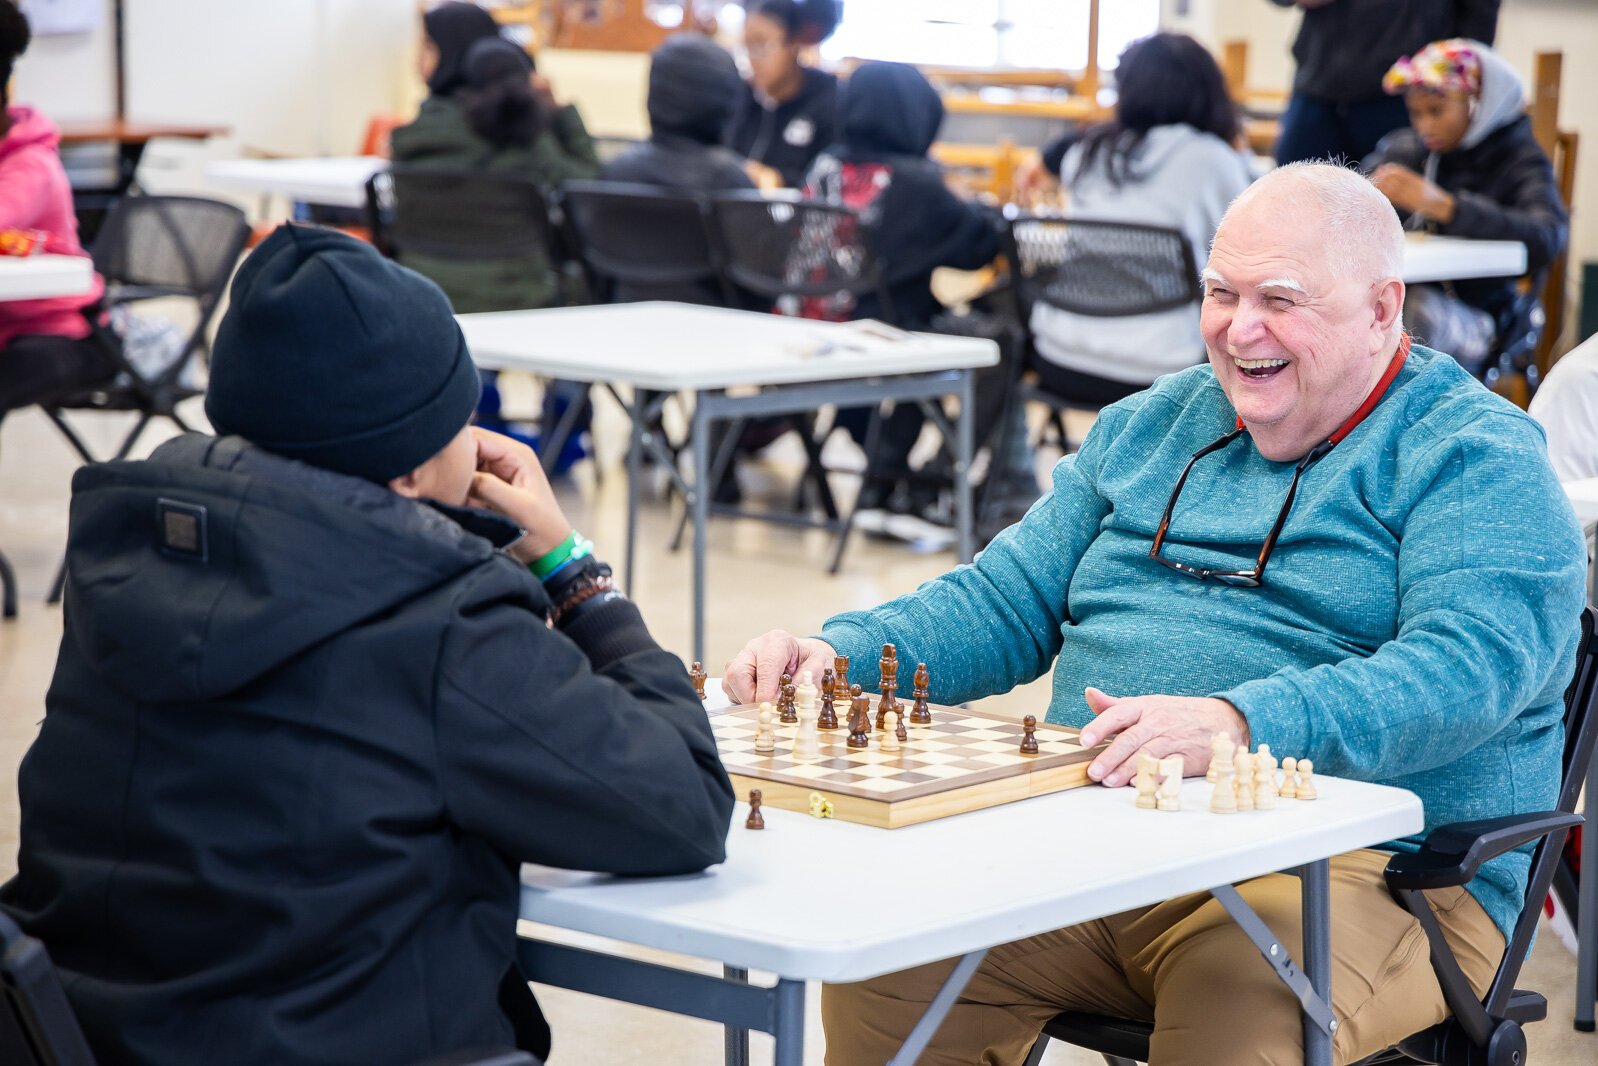 An intergenerational chess event at the Ypsilanti Senior Center.